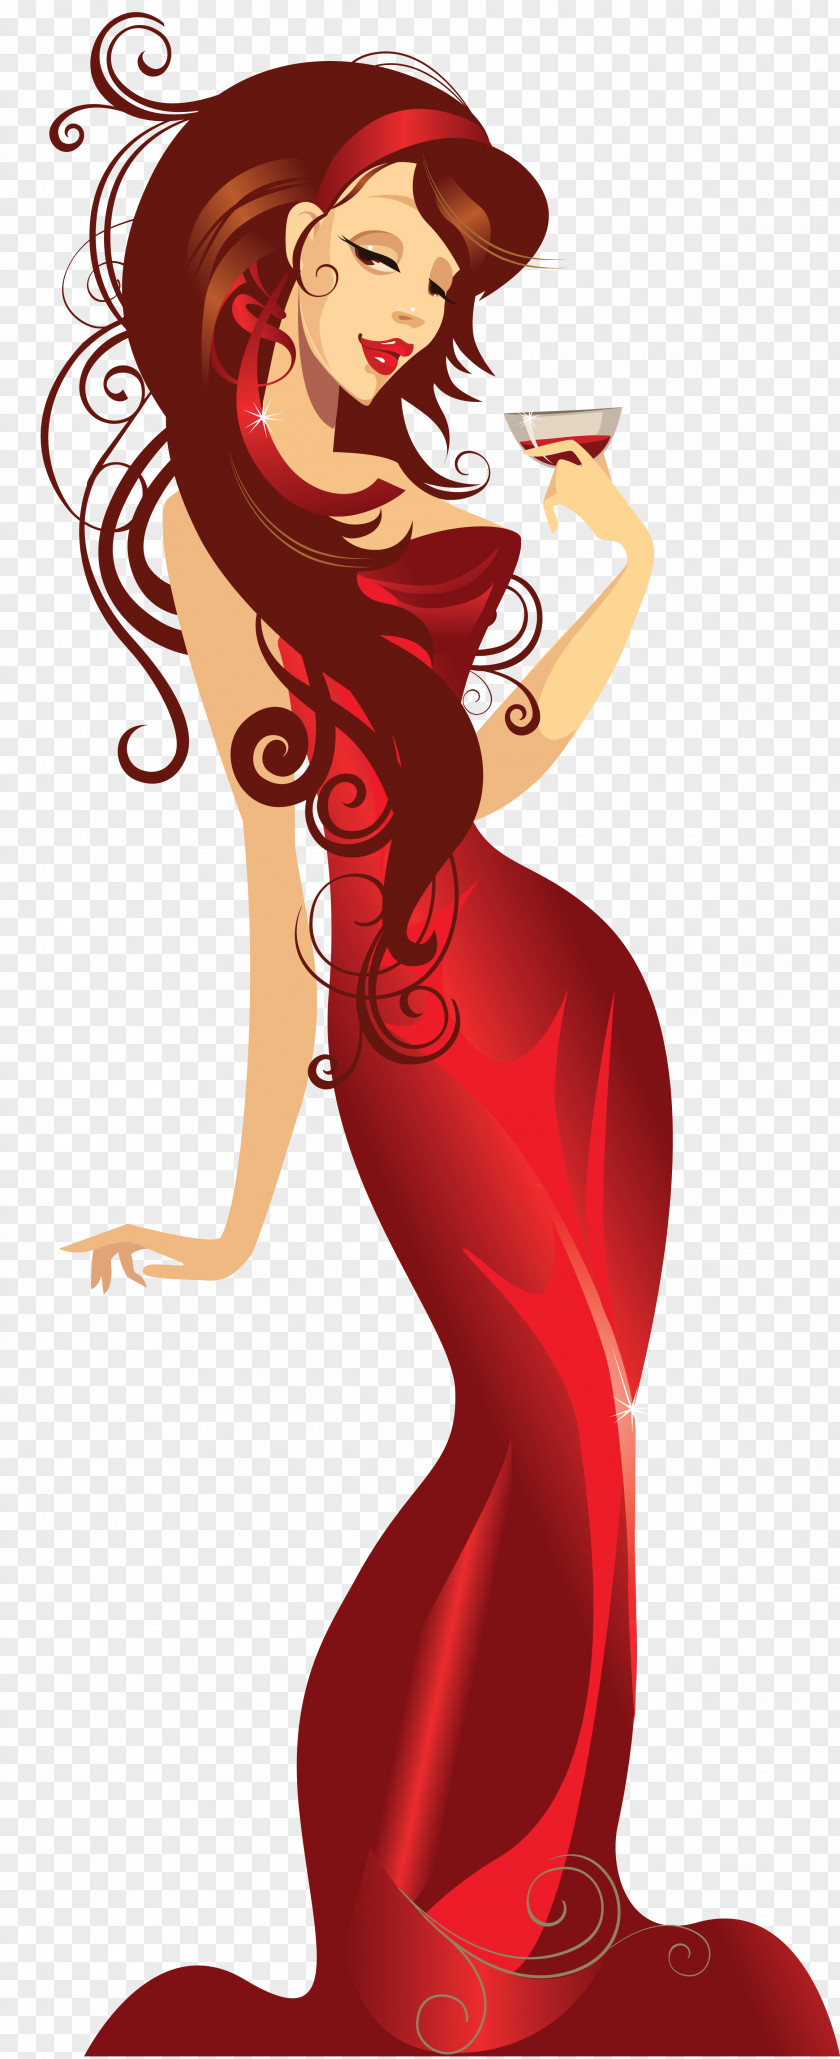 STYLE Cartoon Woman PNG